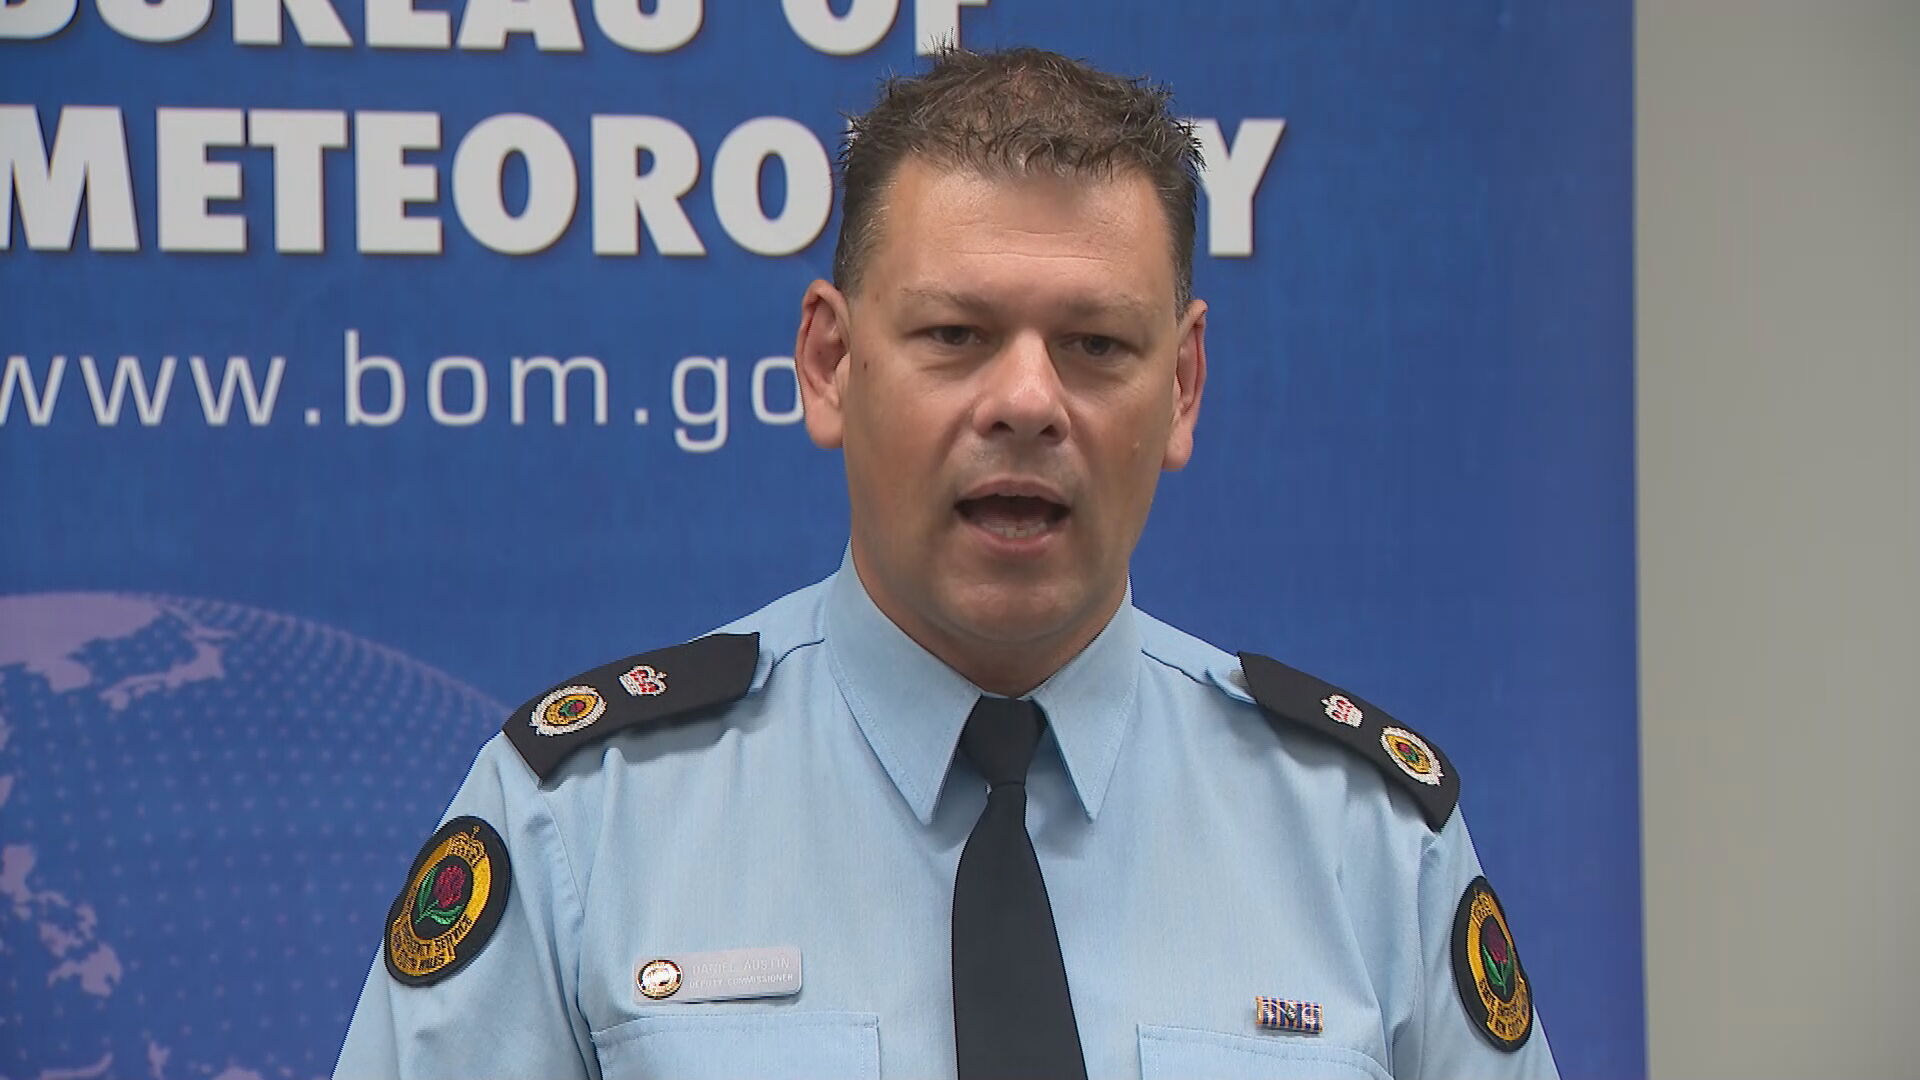 NSW State Emergency Service Deputy Commission Daniel Austin said widespread rainfall brought risks.